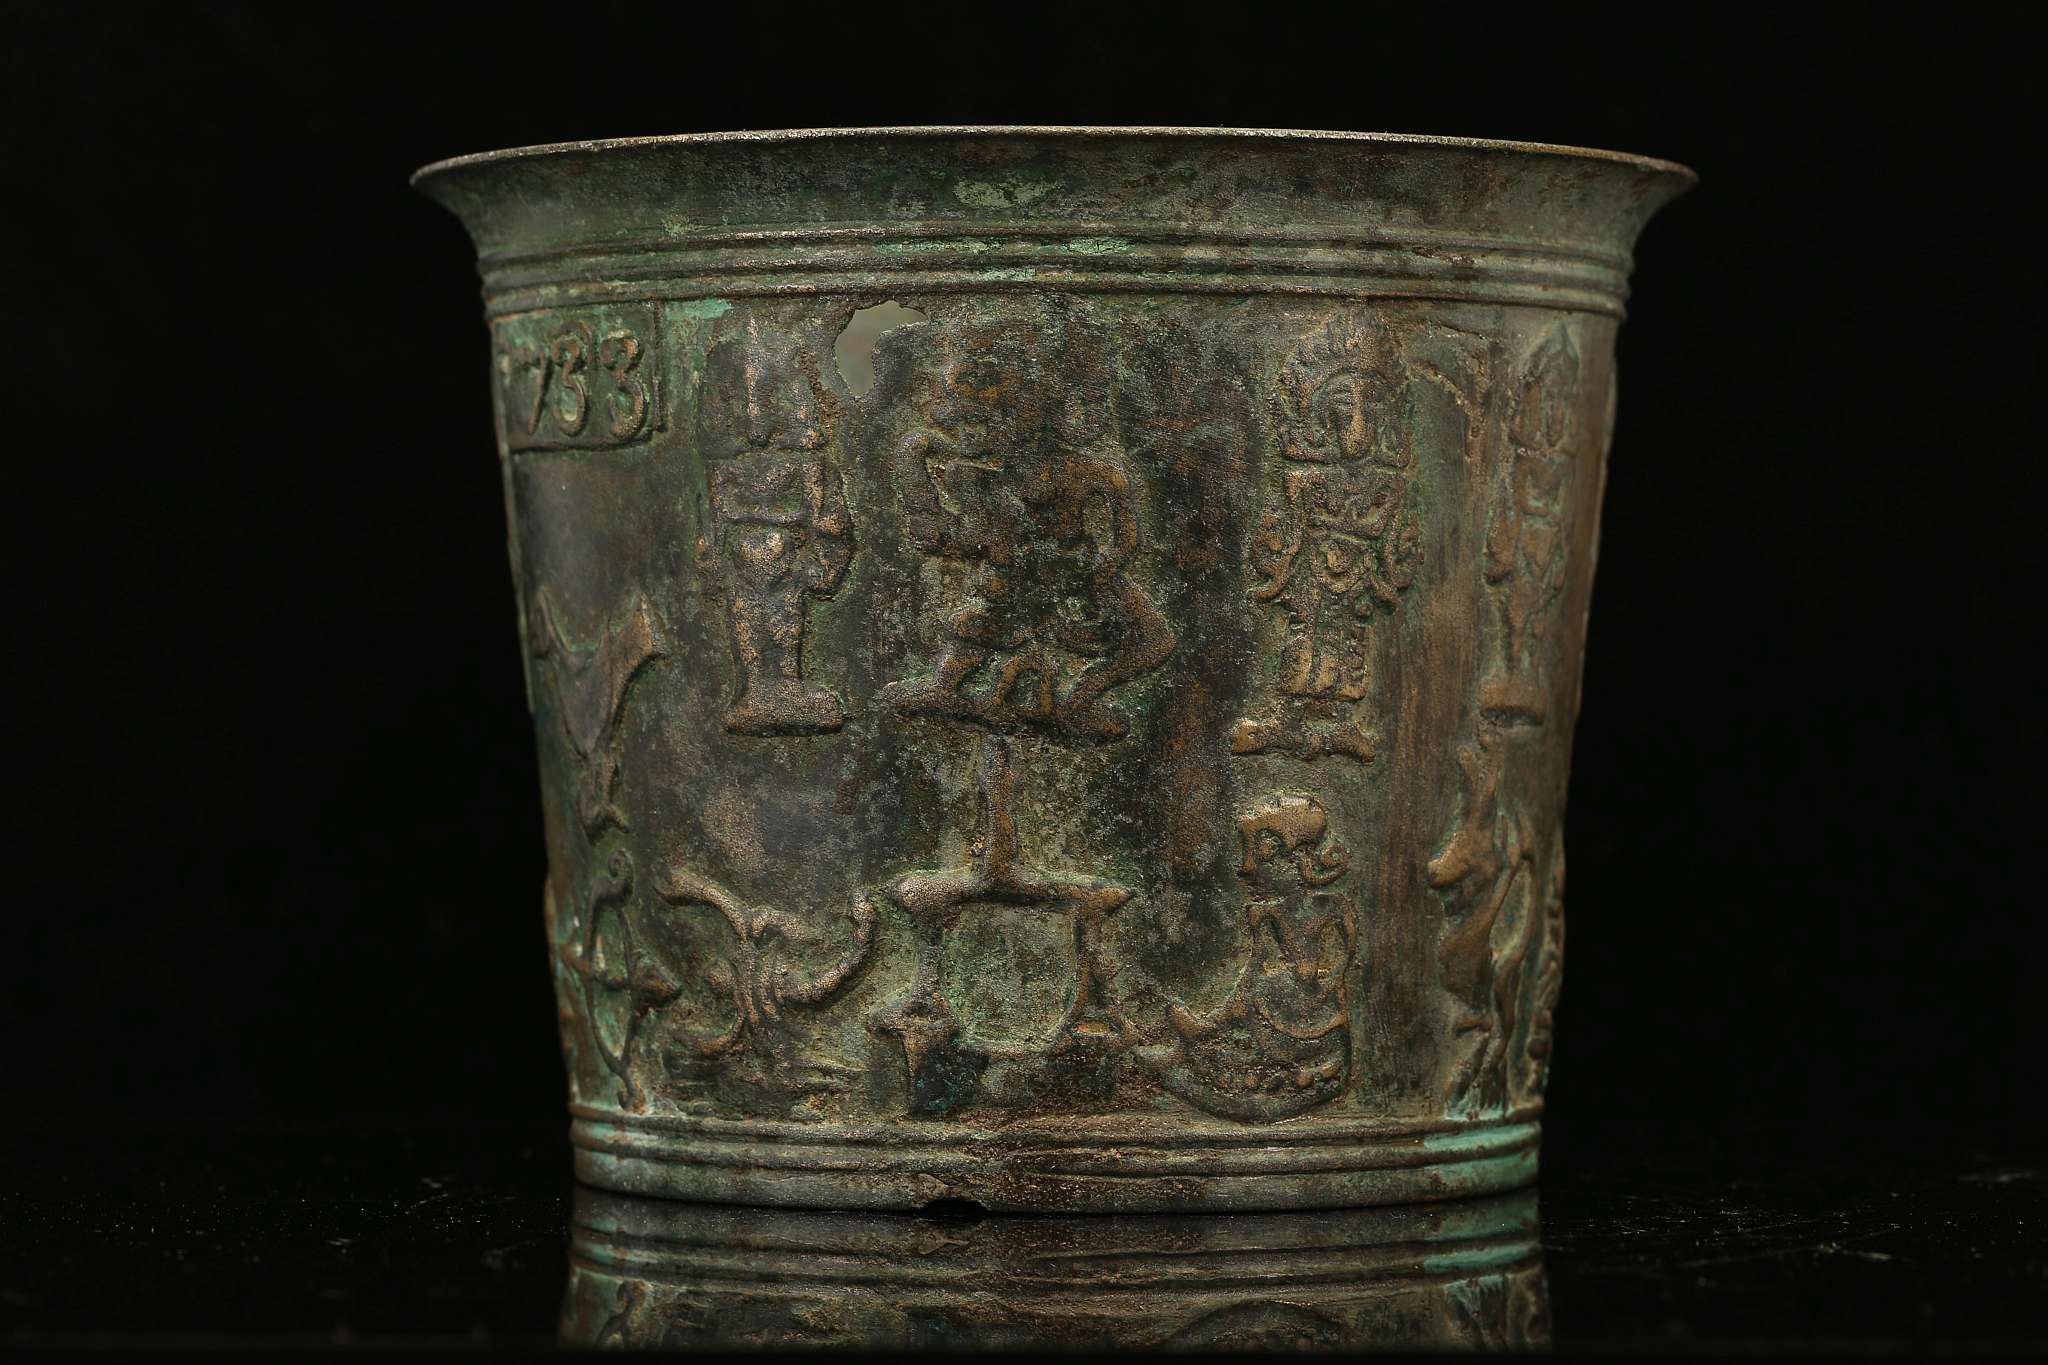 A JAVANESE BRONZE ZODIAC BOWL, INDONESIA Majapahit Period, circa 14th-15th Century A.D. Decorated in - Image 4 of 6